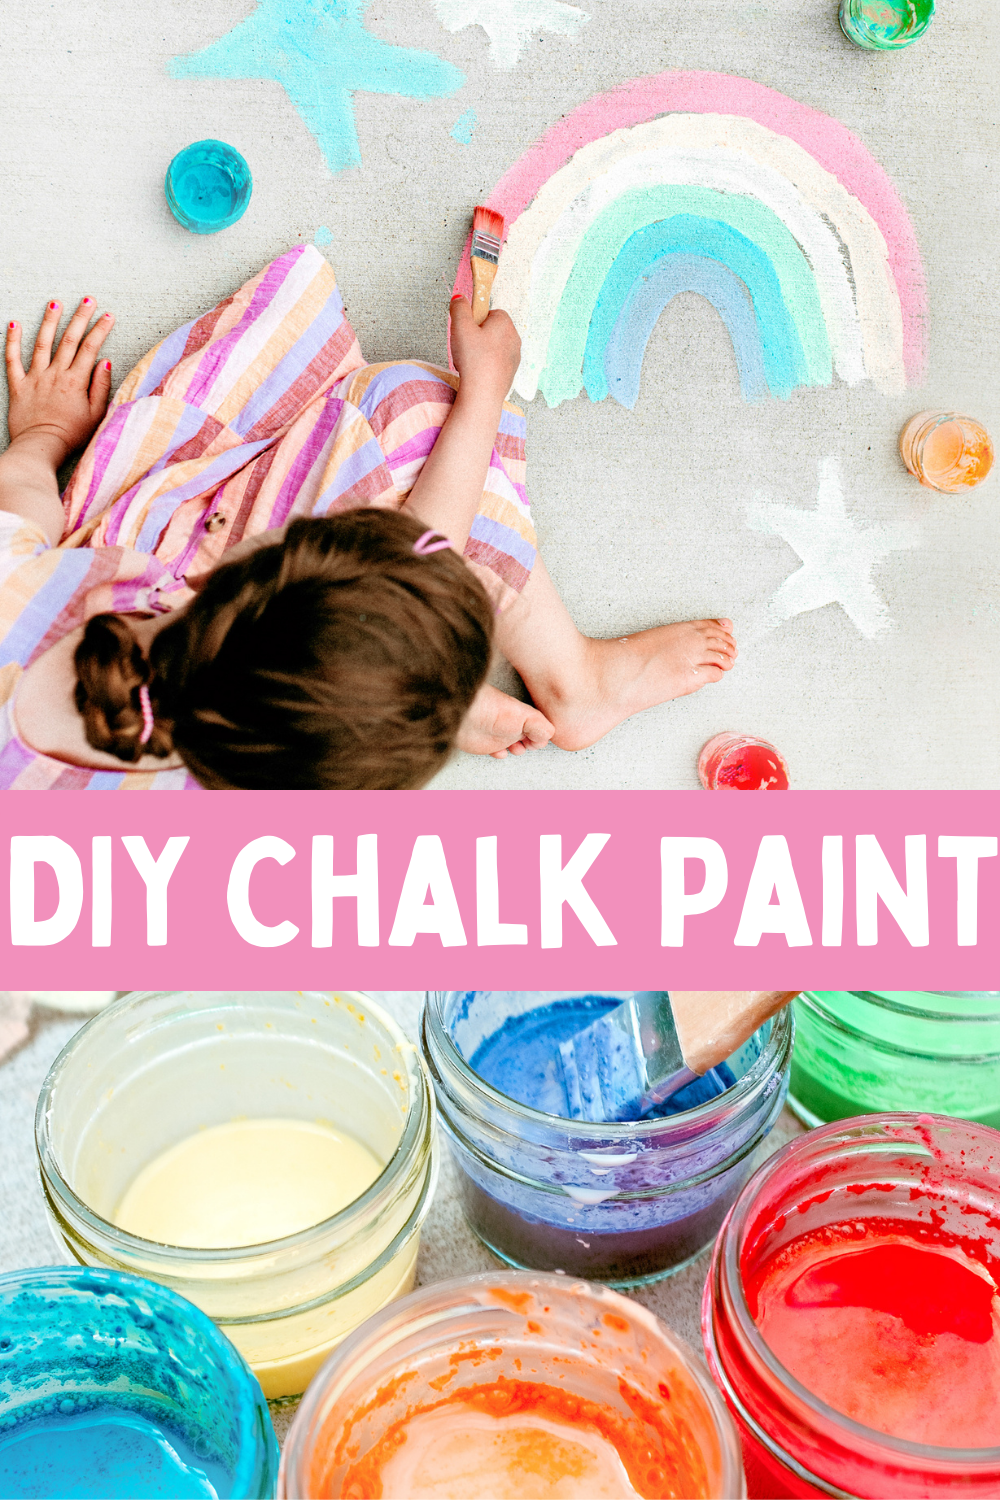 Homemade Colourful Chalk How to make coloured chalk